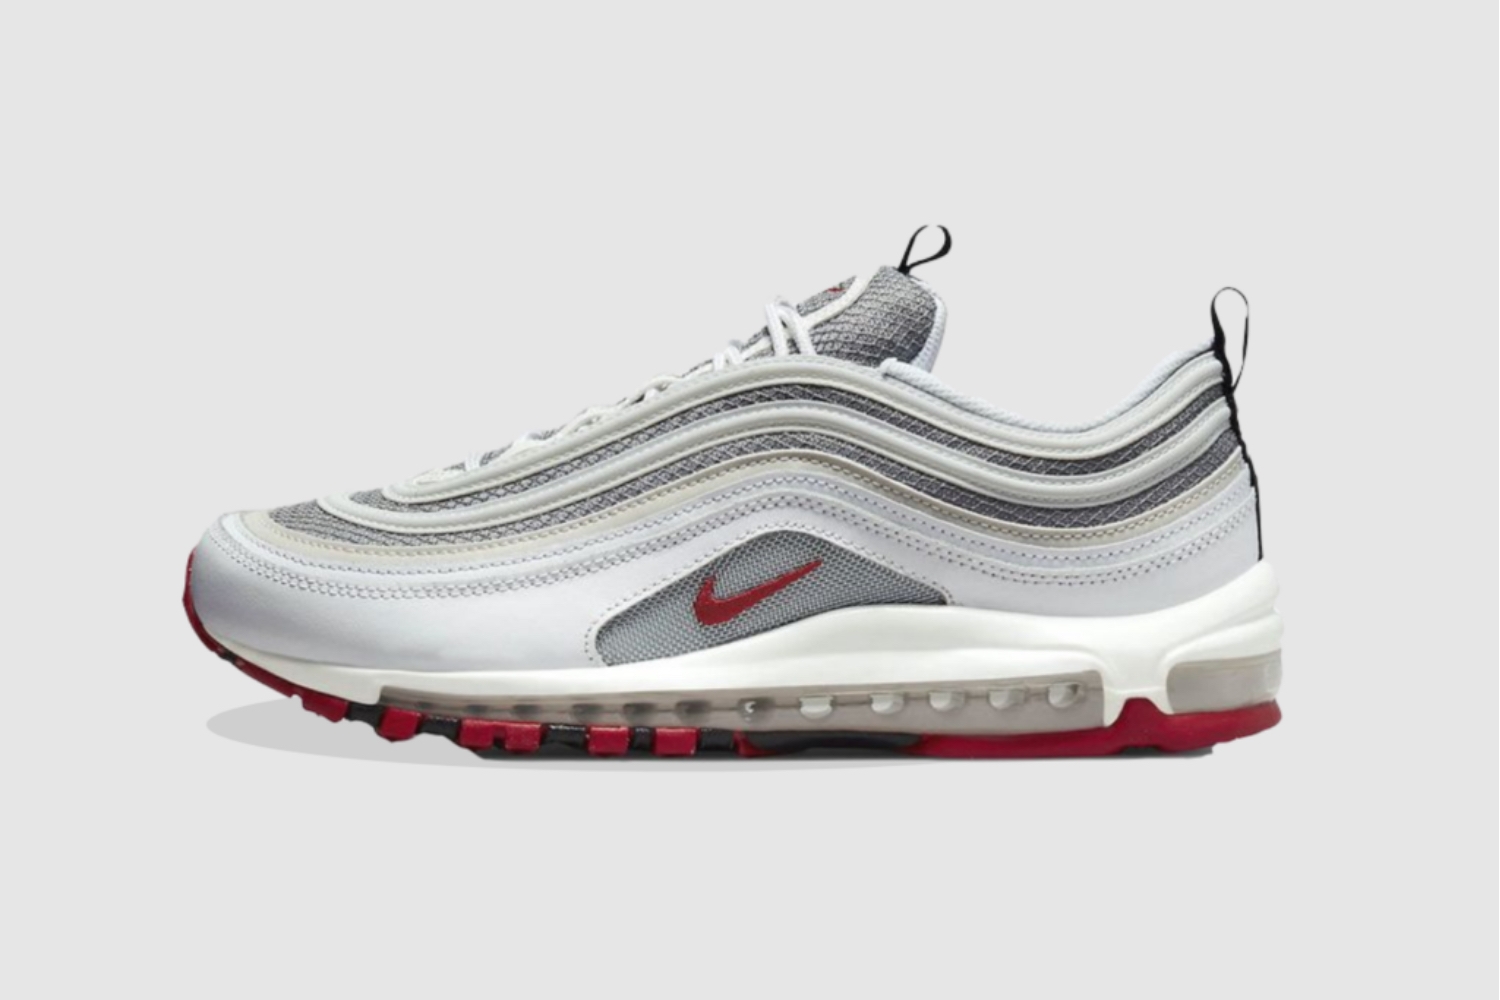 Take a look at the Nike Air Max 97 'White Bullet'